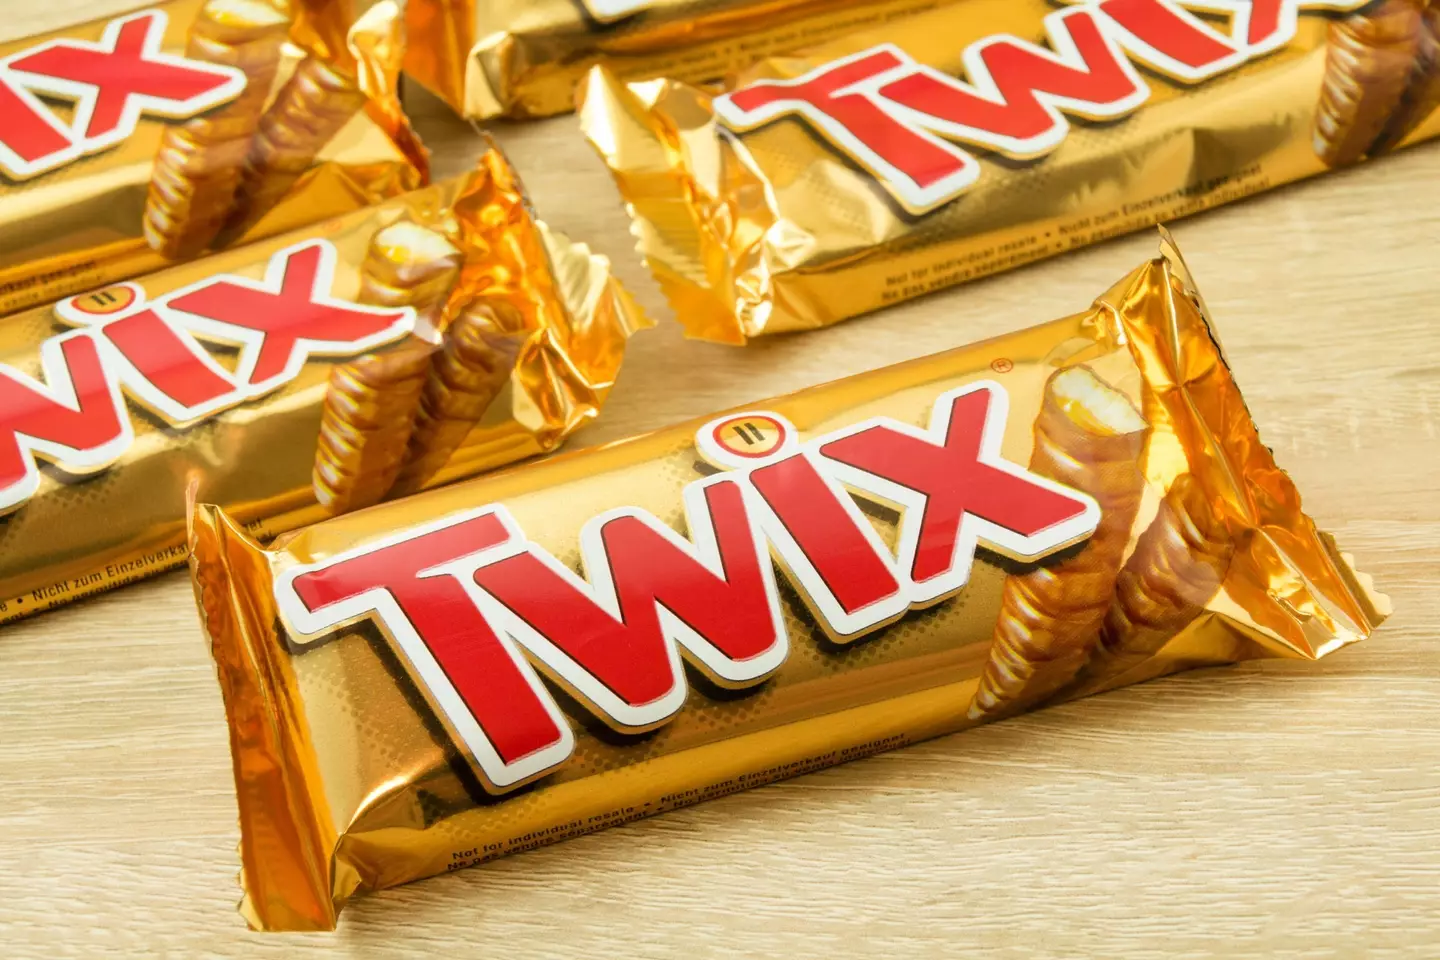 Twix is just the latest chocolate bar to reduce in size.